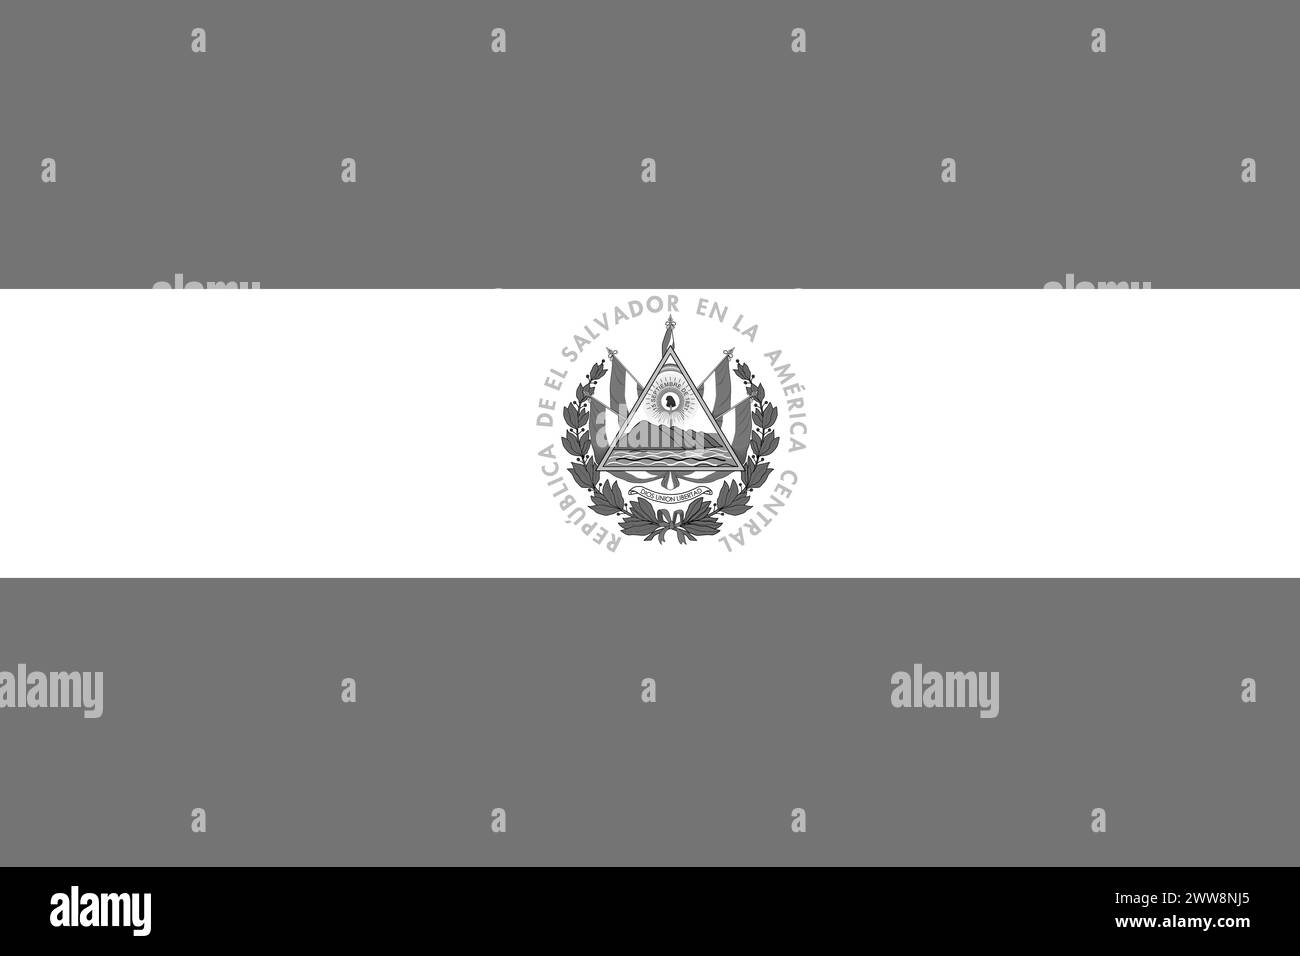 El Salvador flag - greyscale monochrome vector illustration. Flag in black and white Stock Vector